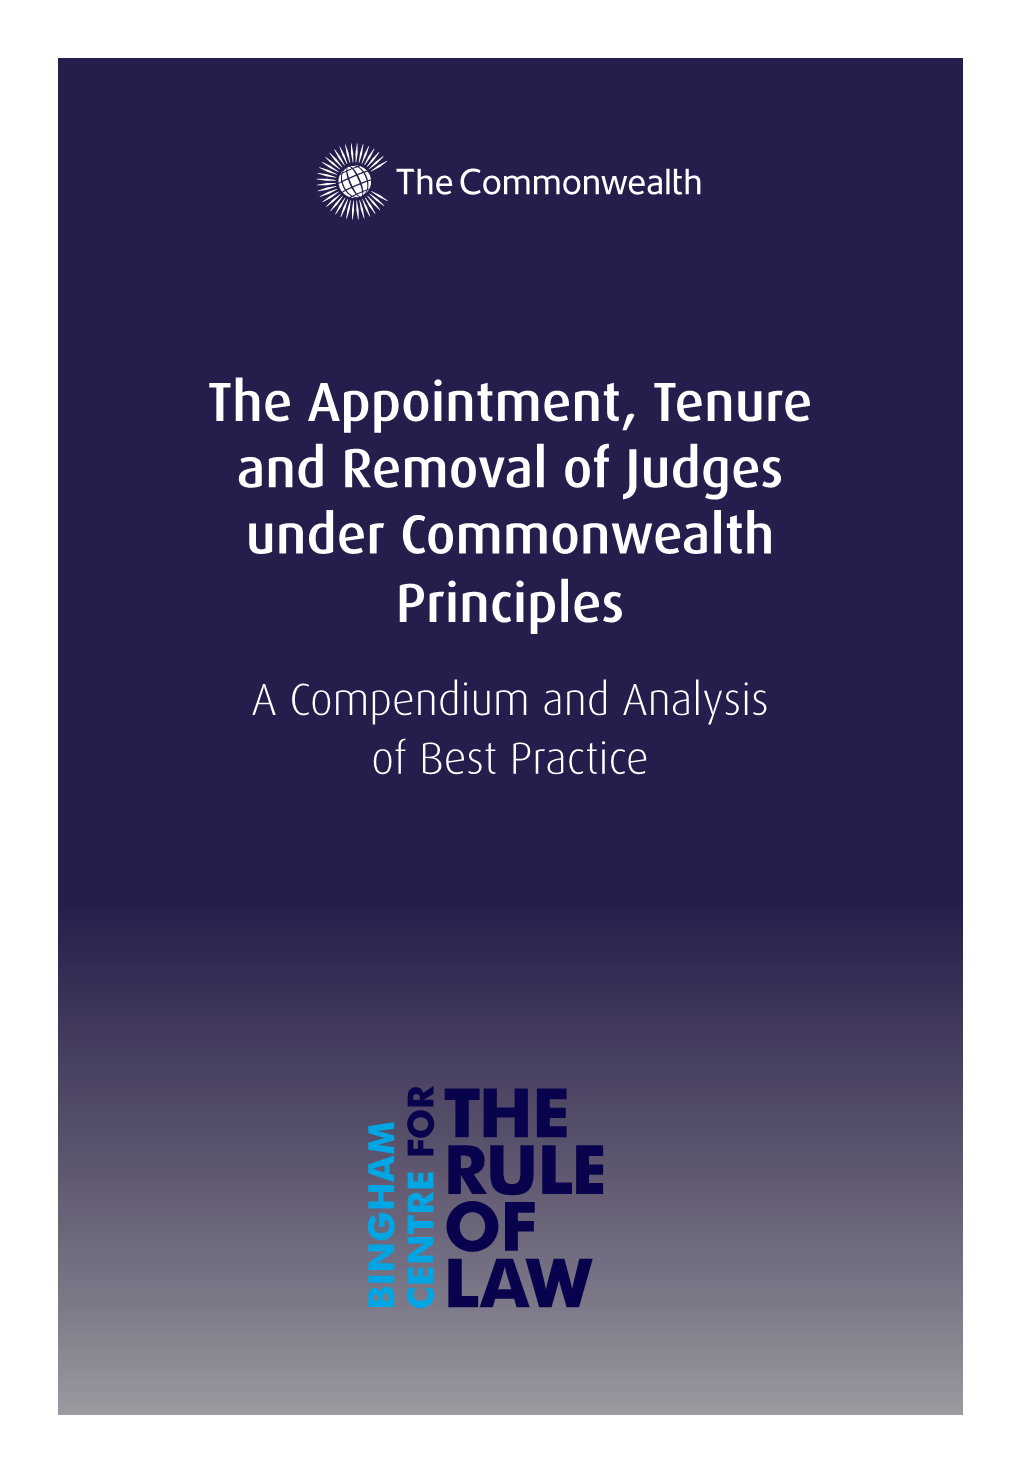 The Appointment, Tenure and Removal of Judges Under Commonwealth